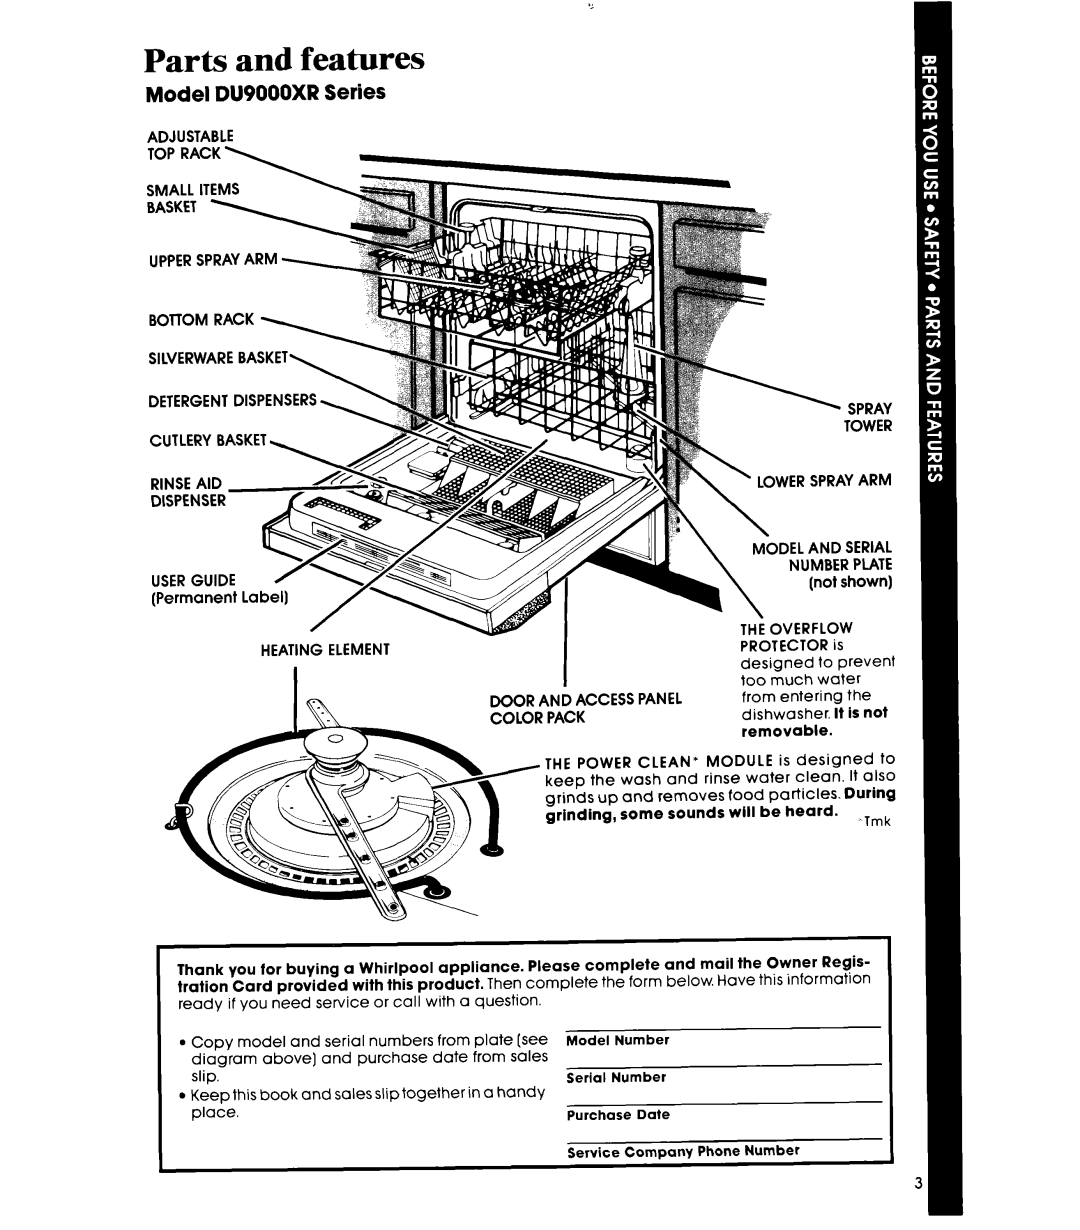 Whirlpool manual Parts and features, Model DU9000XR Series 